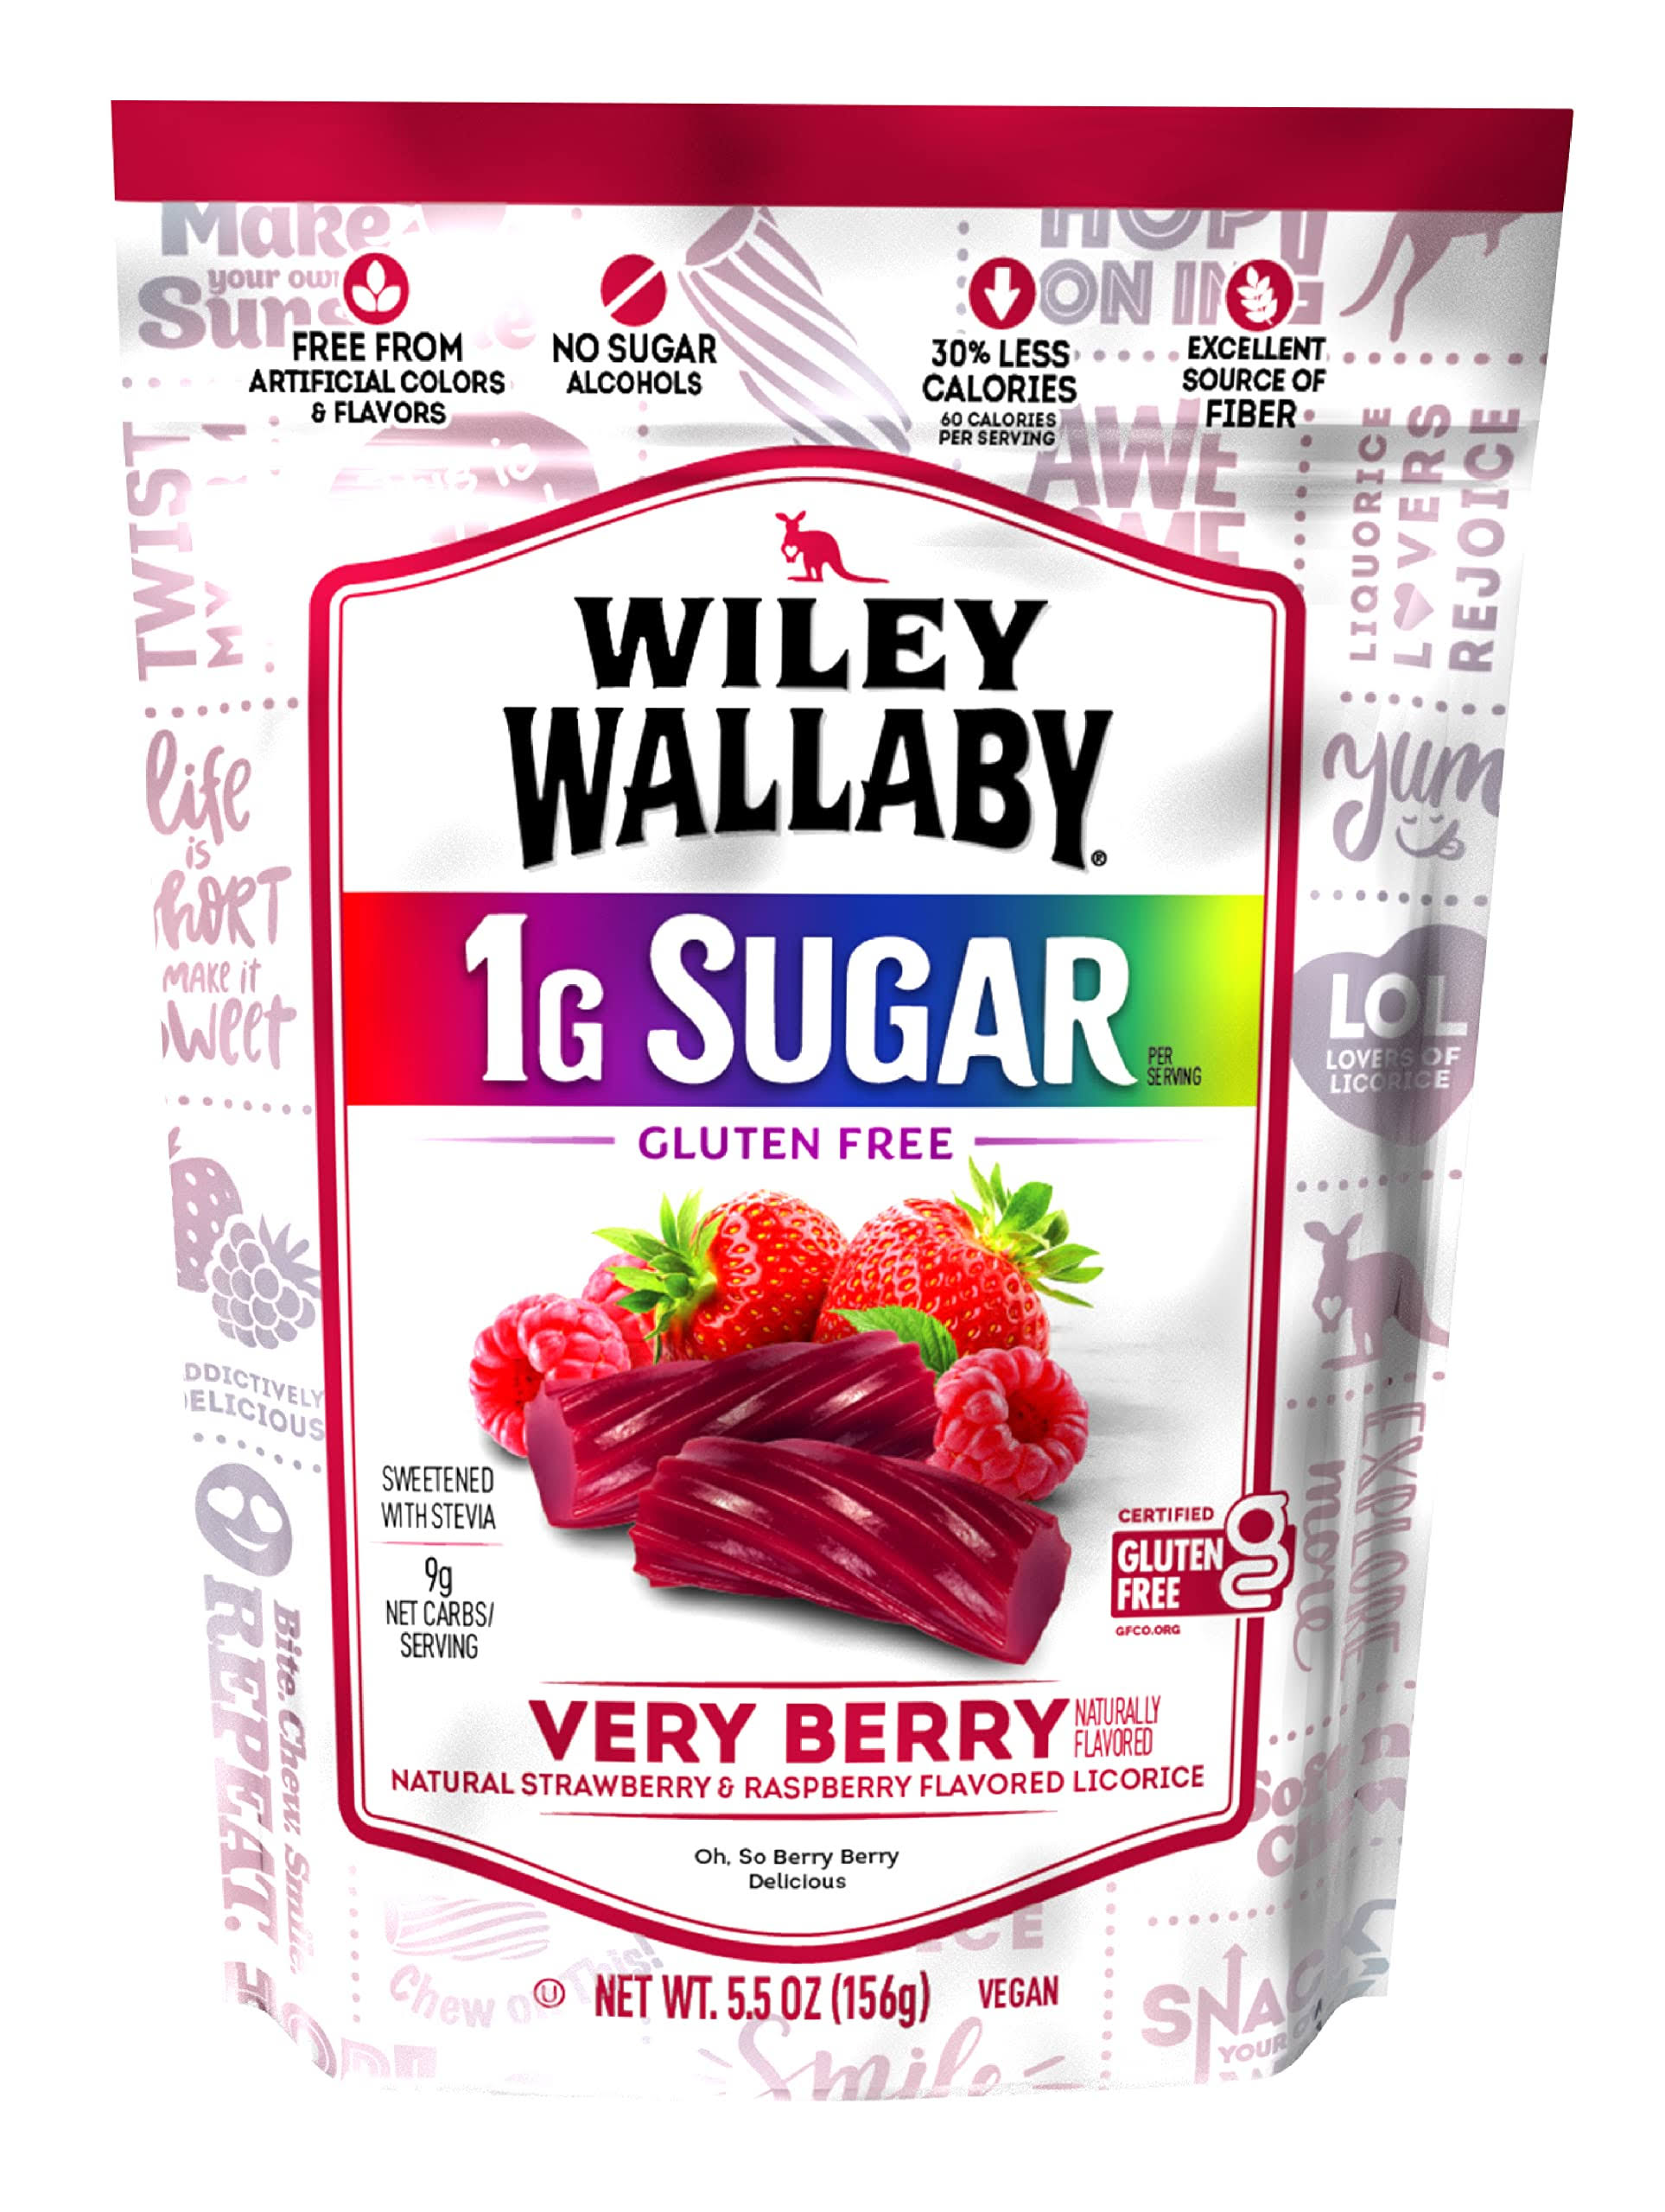 Wiley Wallaby 5.5 Ounce Very Berry Low Sugar Gluten Free Gourmet Australian Style Soft & Chewy Licorice Candy Twists (5.5 Ounce (Pack of 1))